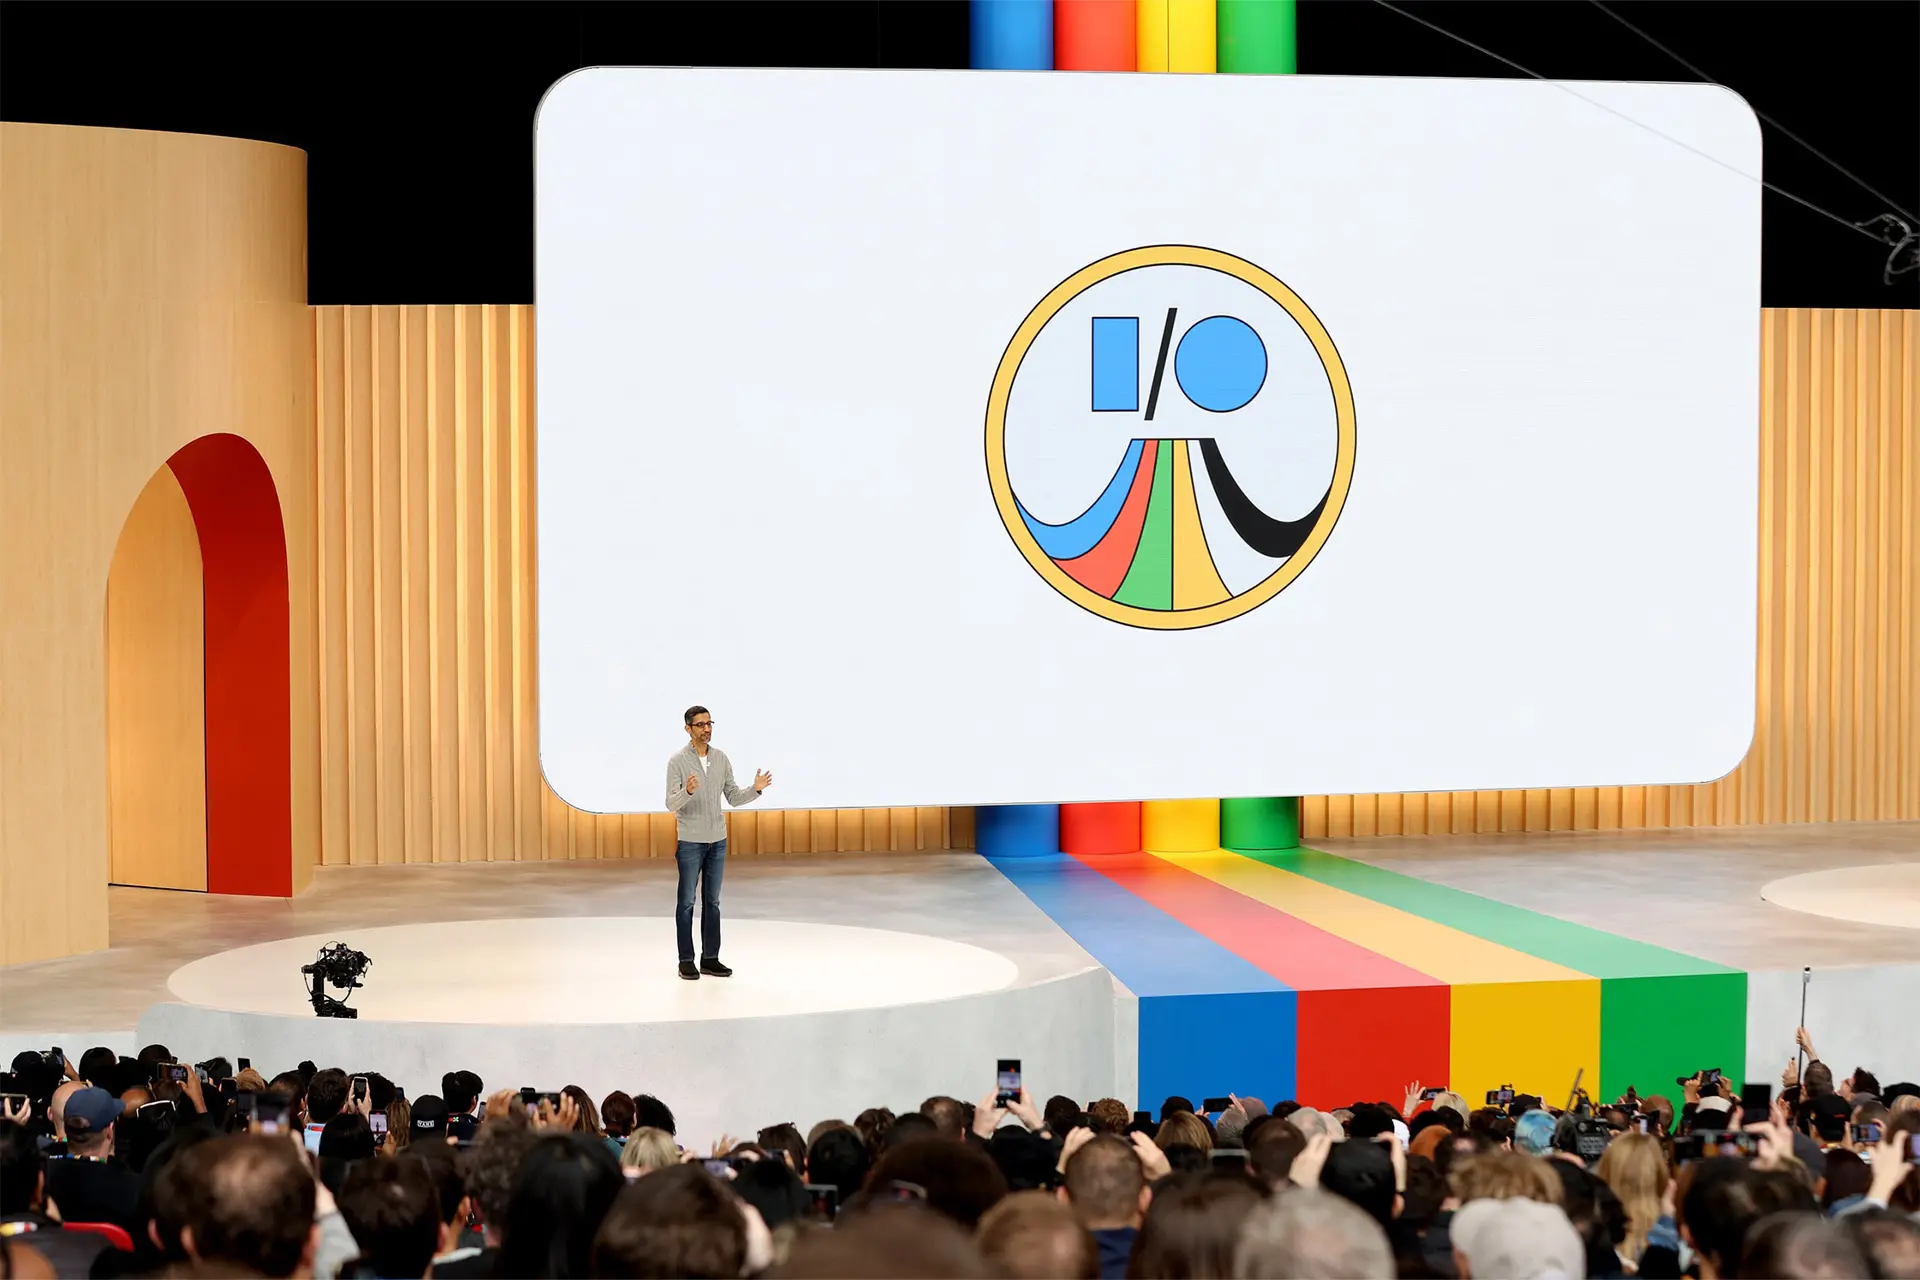 Google I/O Or Google AI? The Problem Is This!